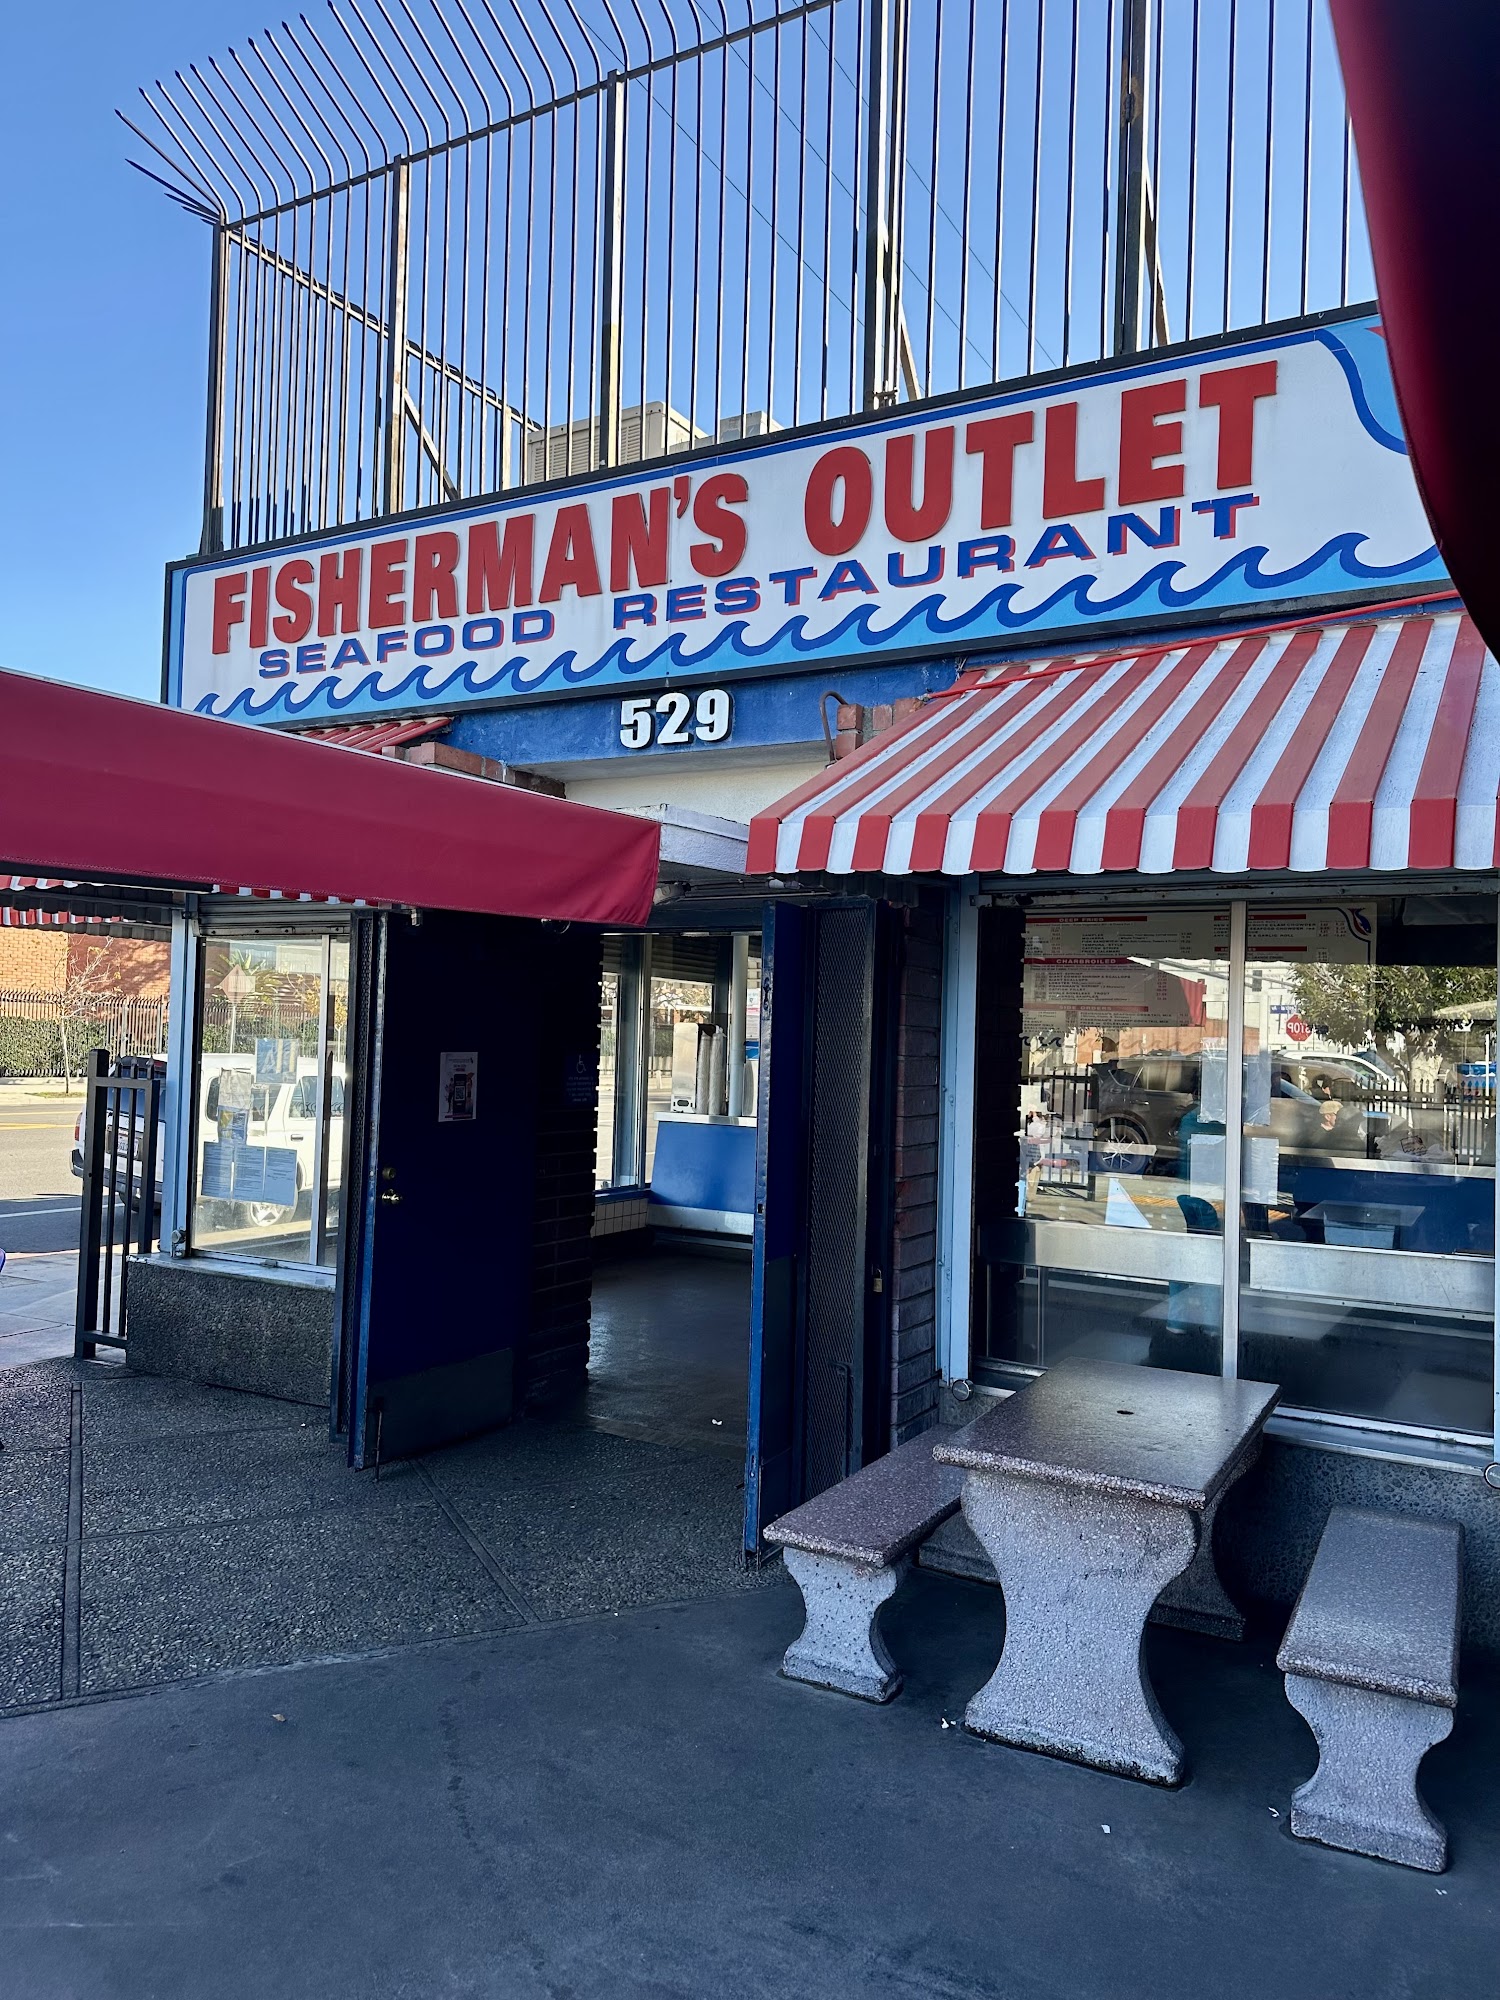 Fisherman's Outlet